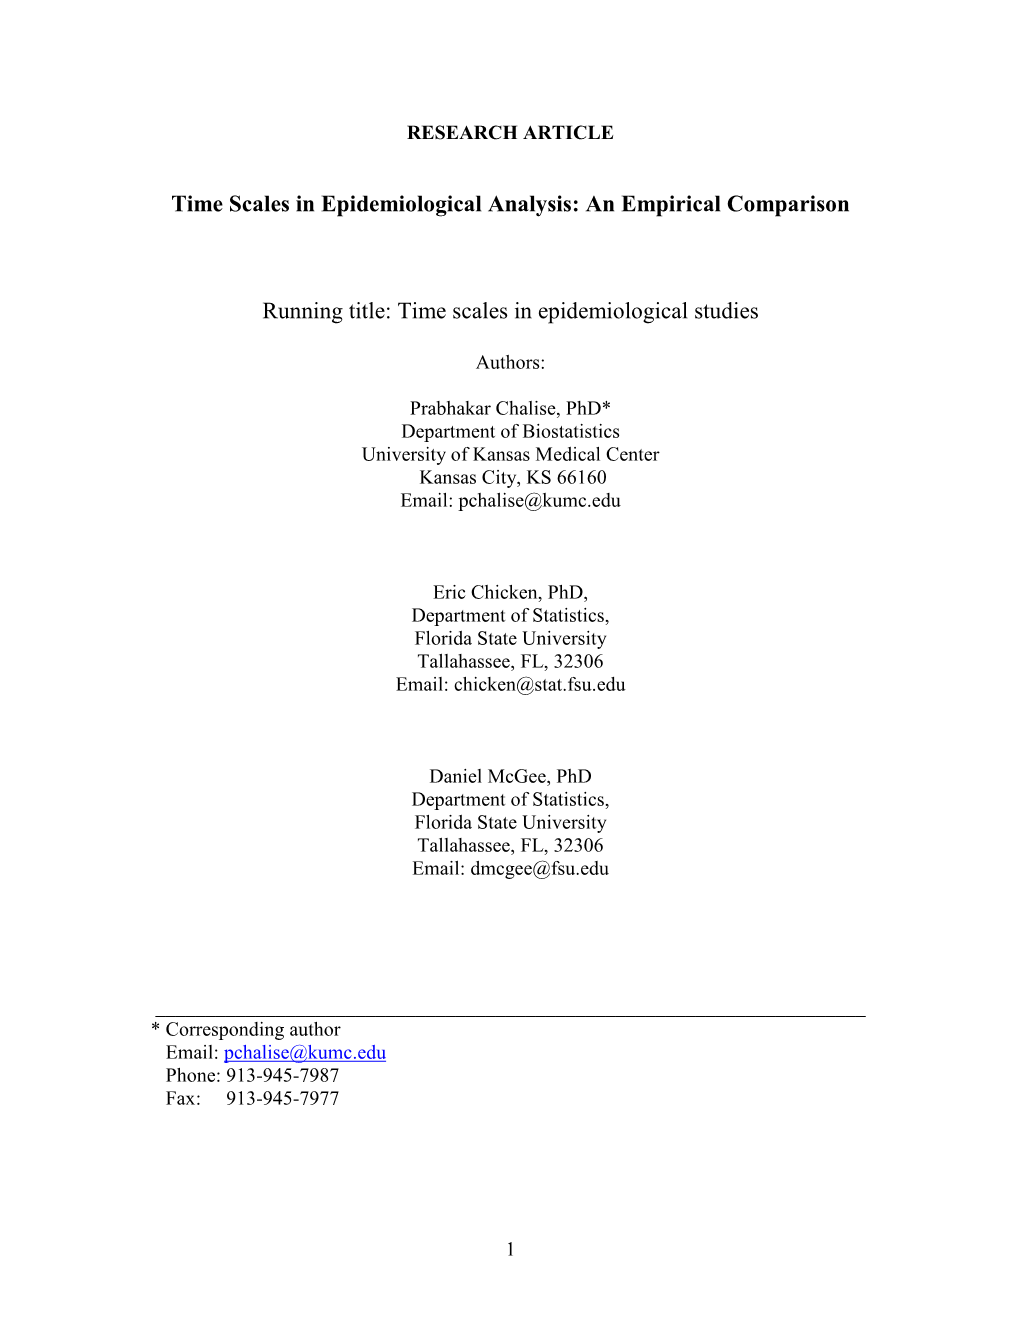 Time Scales in Epidemiological Analysis: an Empirical Comparison